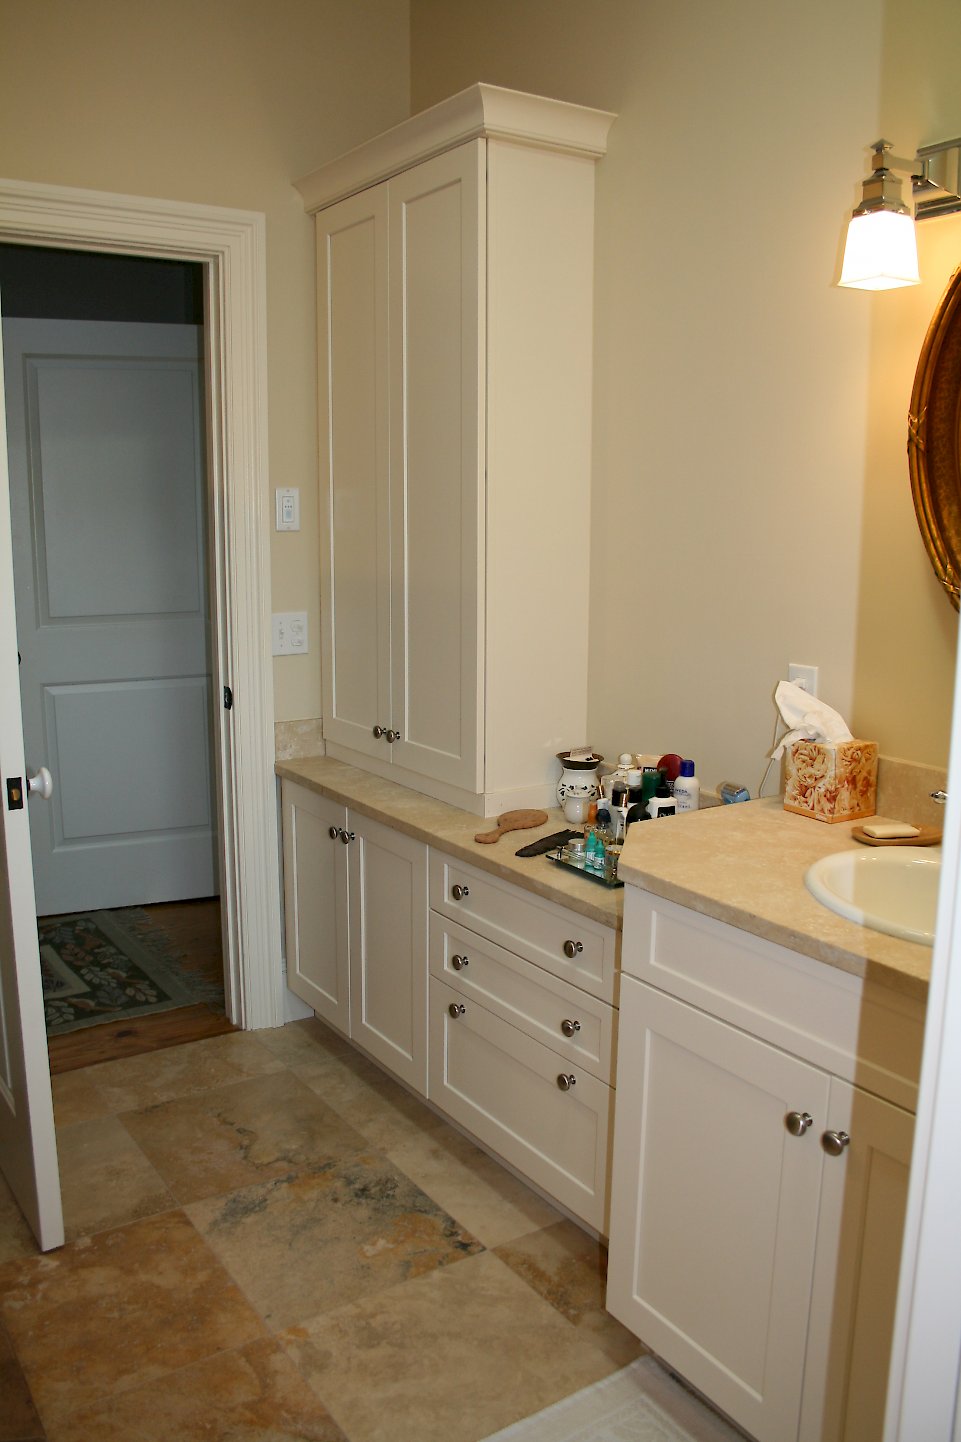 Tall cabinet in the bathroom for towel storage.